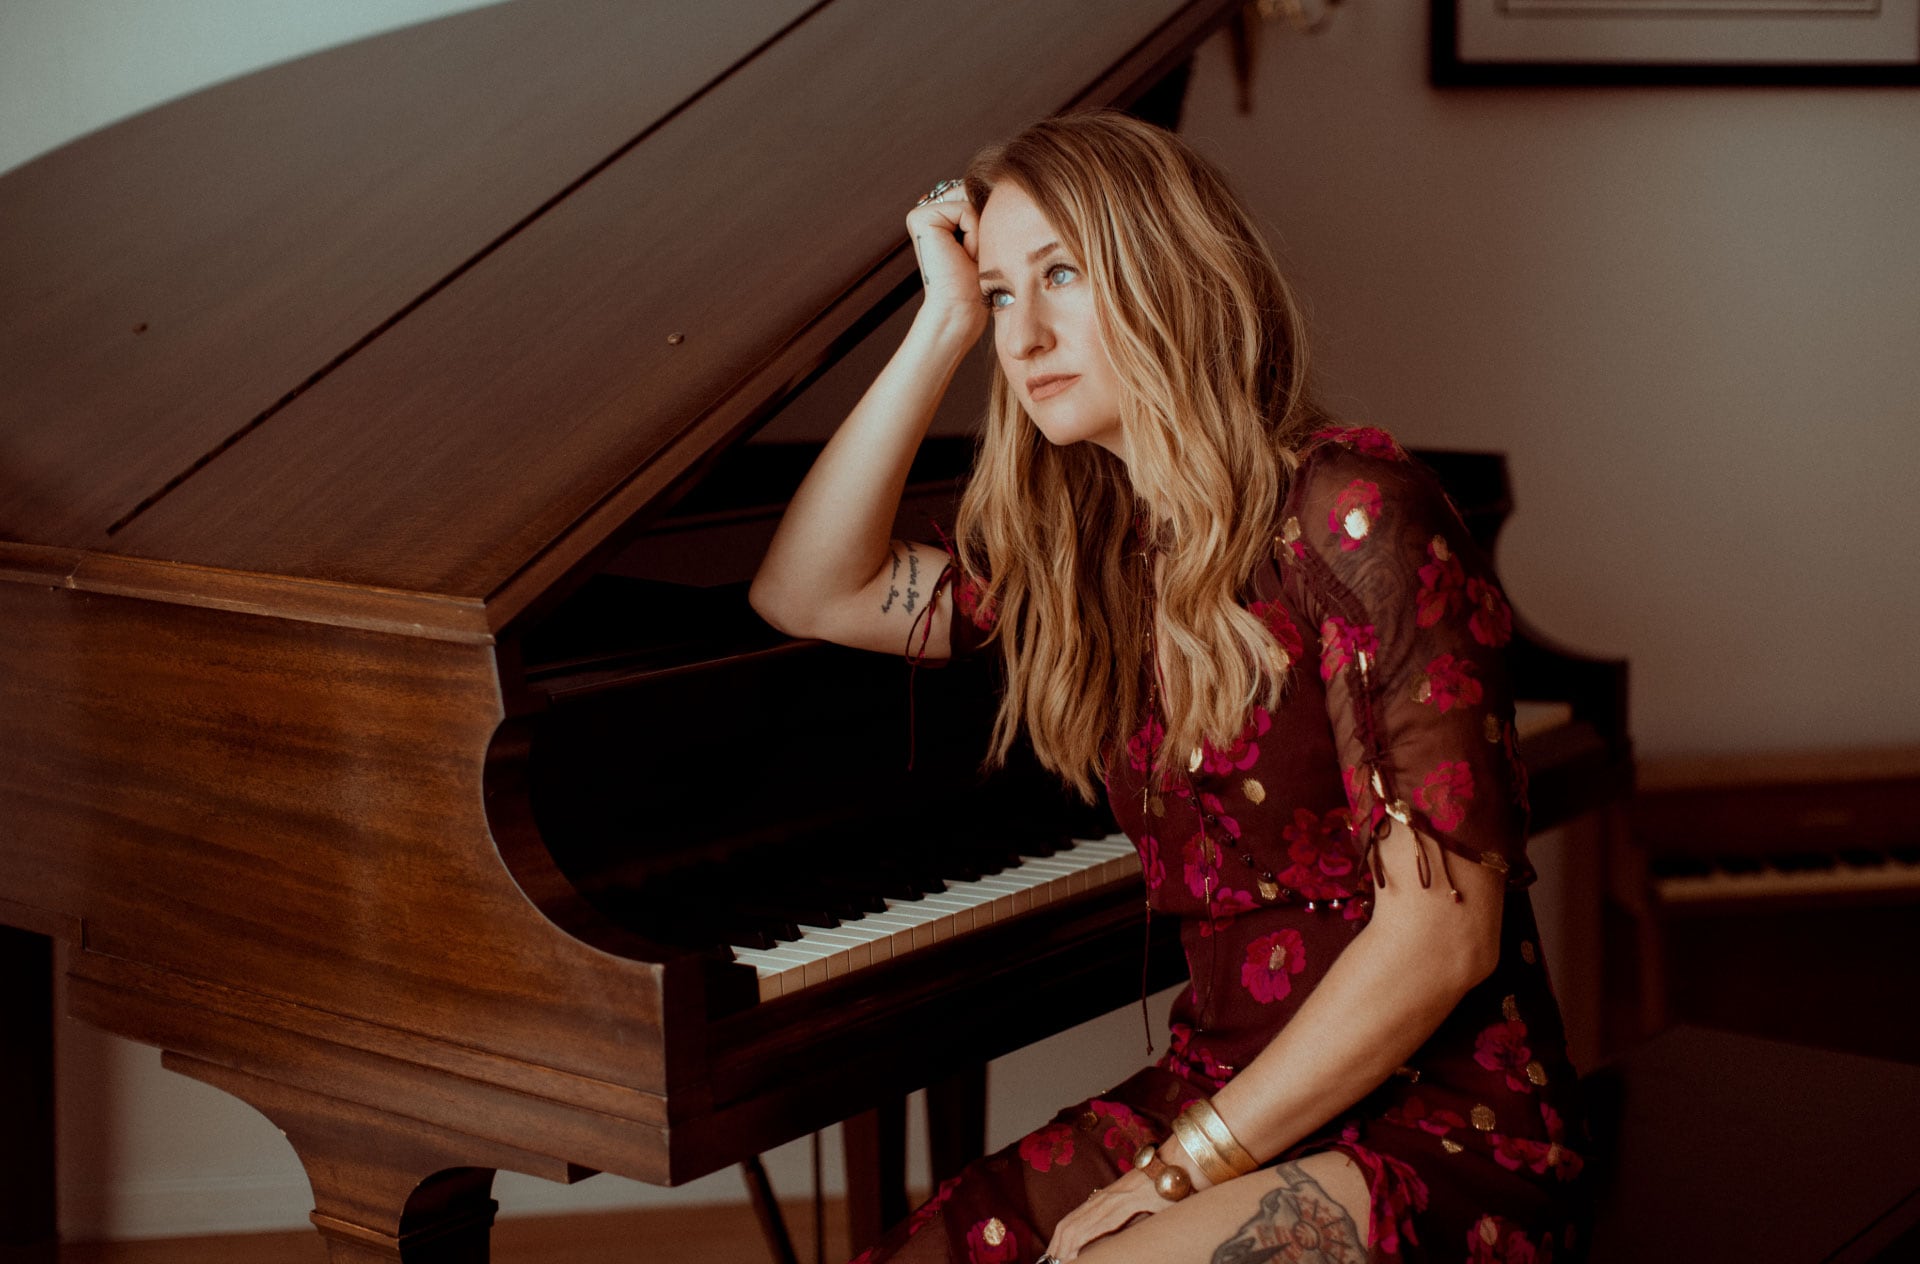 Margo Price at the piano.